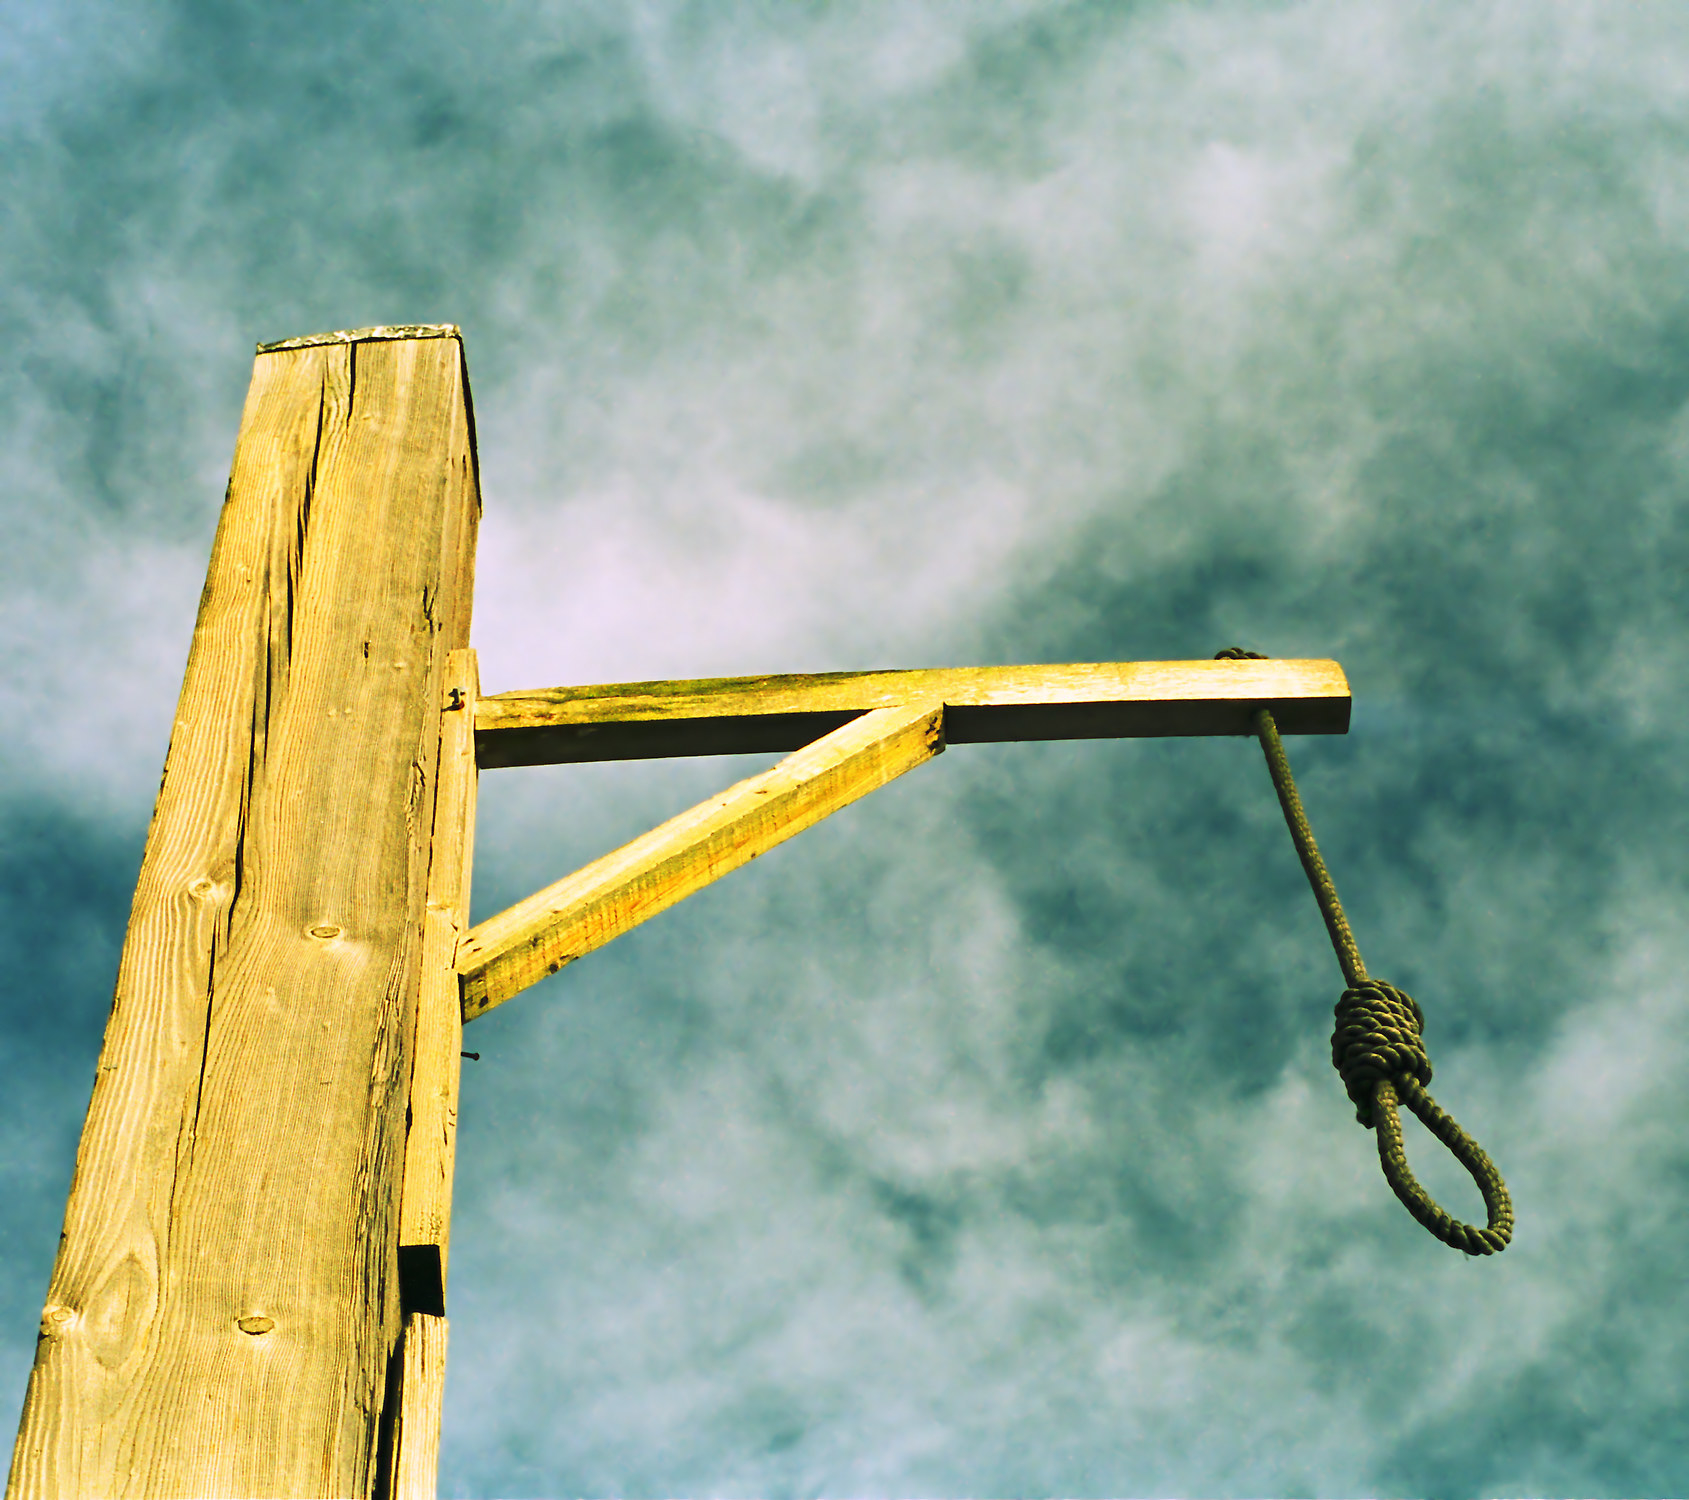 Gibbeting' - using a gallows to display the body of an executed crimin...